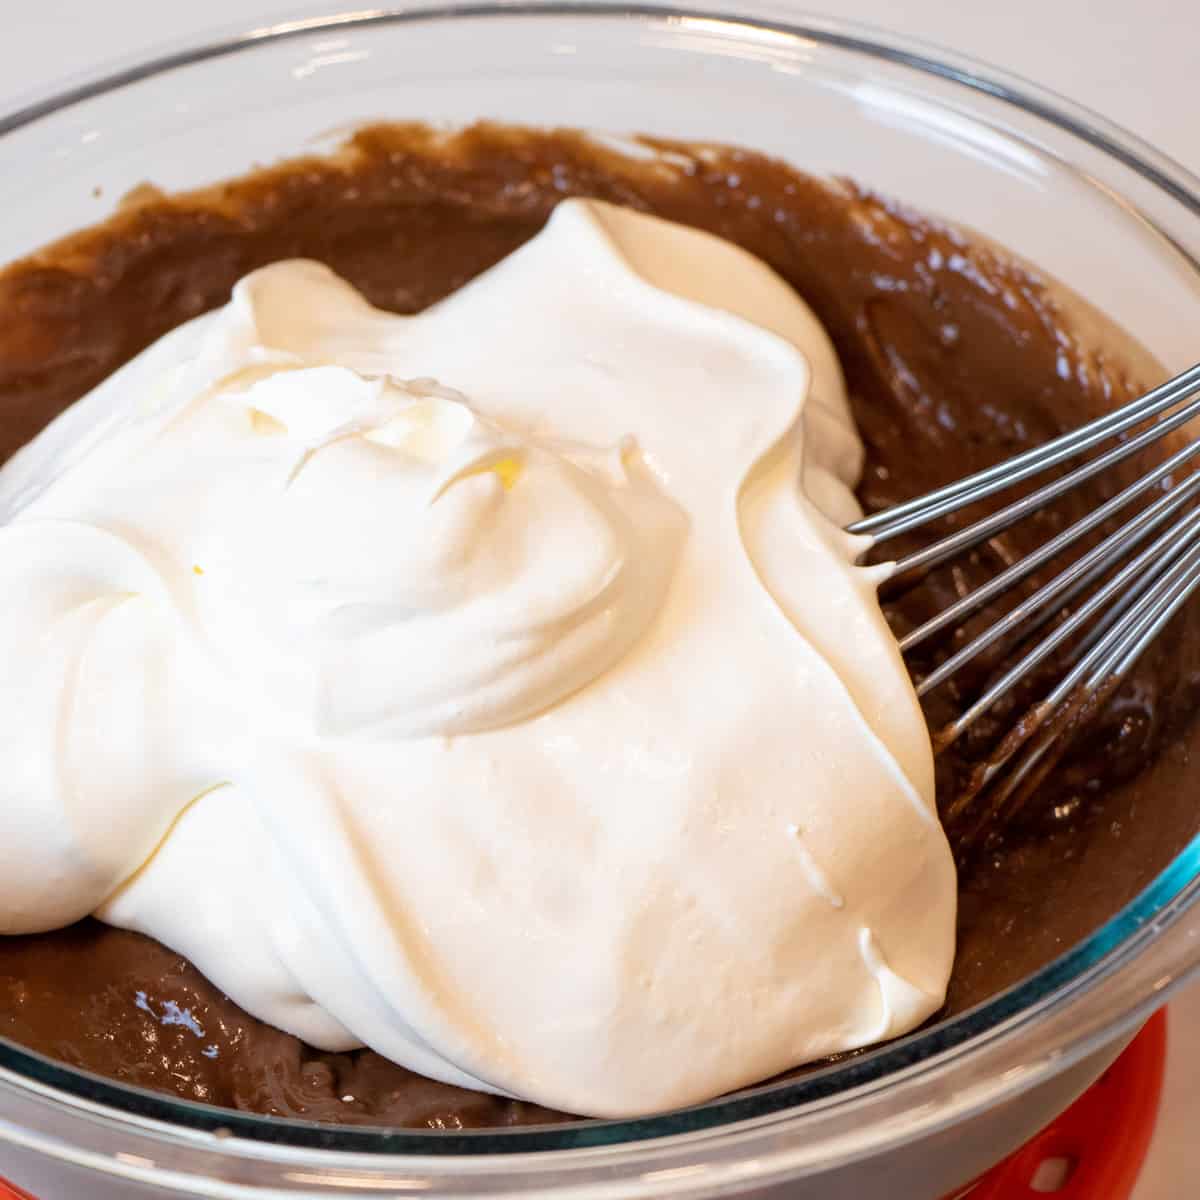 Chocolate pudding and whipped cream in a mixing bowl.